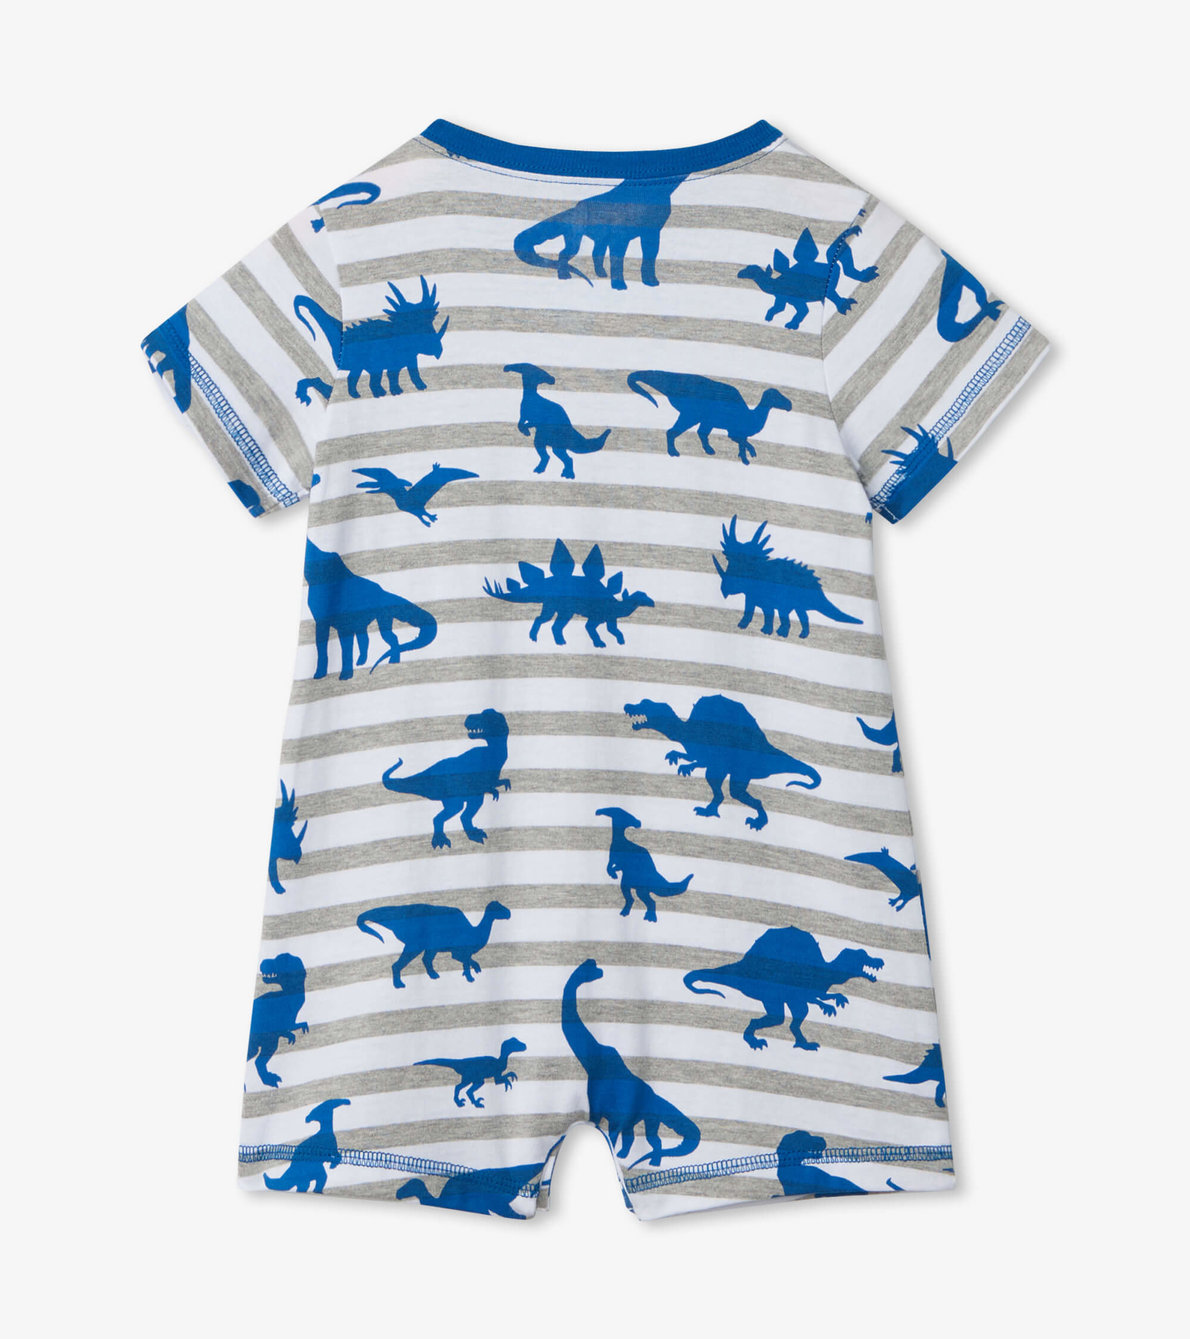 View larger image of Dino Silhouettes Baby Romper